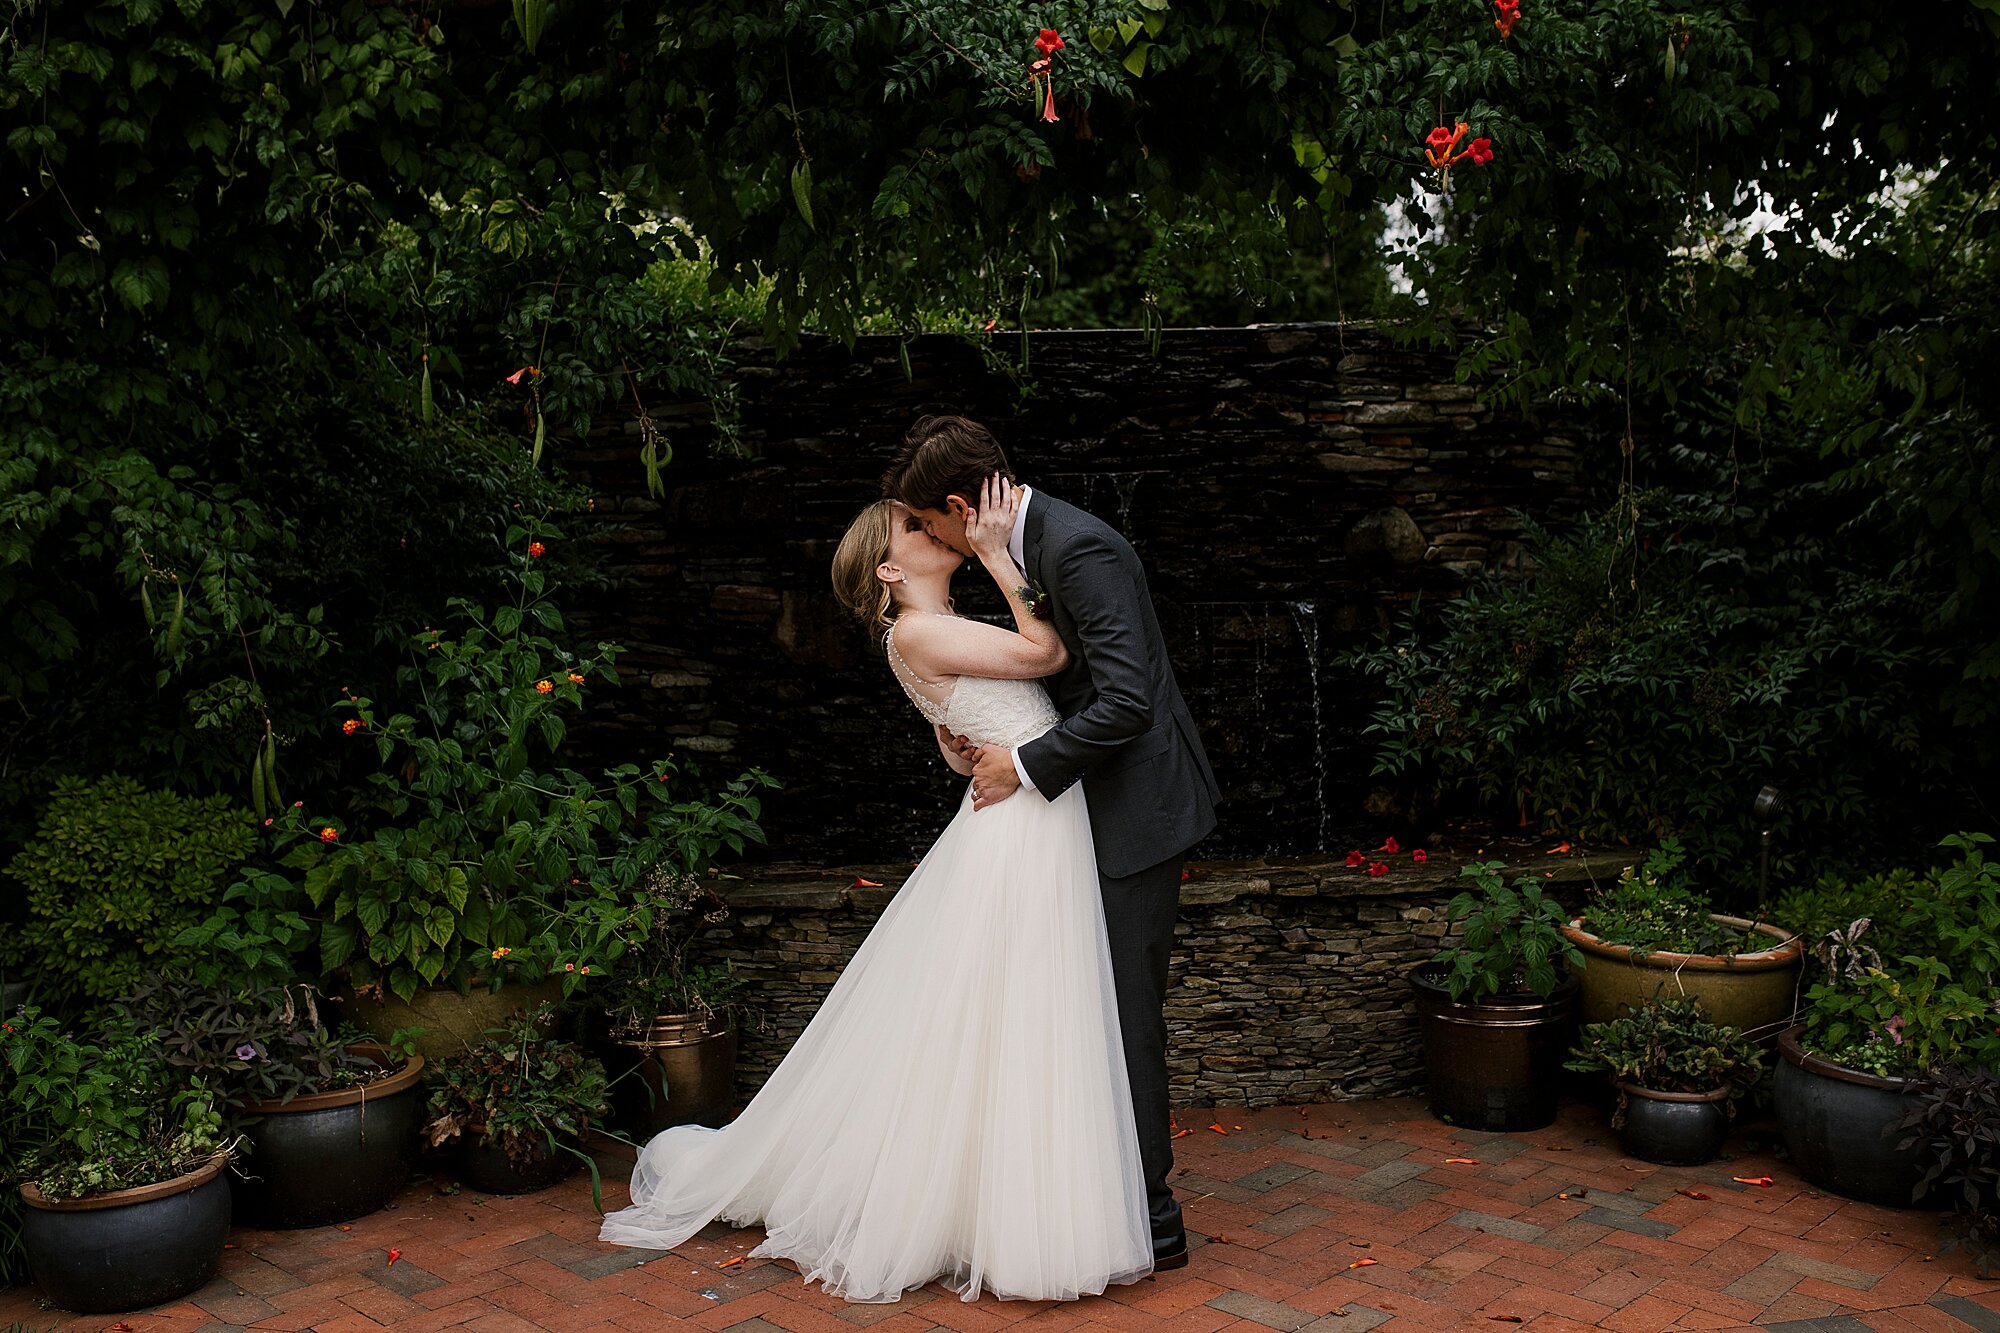 Tori_Zach_Best_Philadelphia_Chester_County_Wedding_Photography_The_Gables_at_Chadds_Ford_Love_by_Joe_Mac_061.JPG